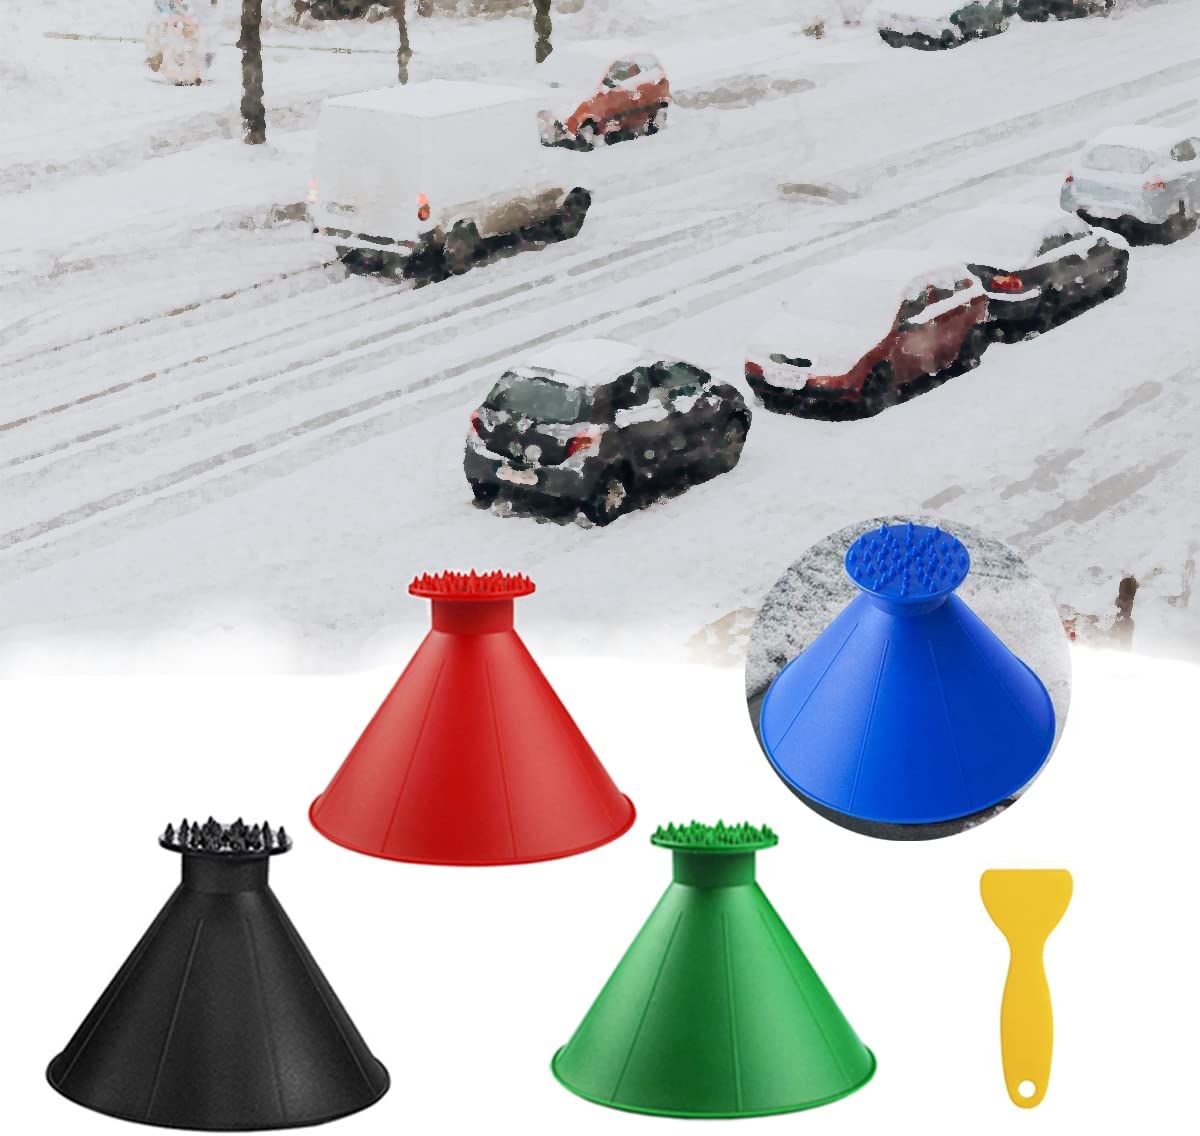 [Gazdag]Snow Brush and Ice Scraper for Car Windshield with for Cars, SUV,  Trucks - Detachable Scraper - No Scratch - Heavy Duty Handle, Snow Broom